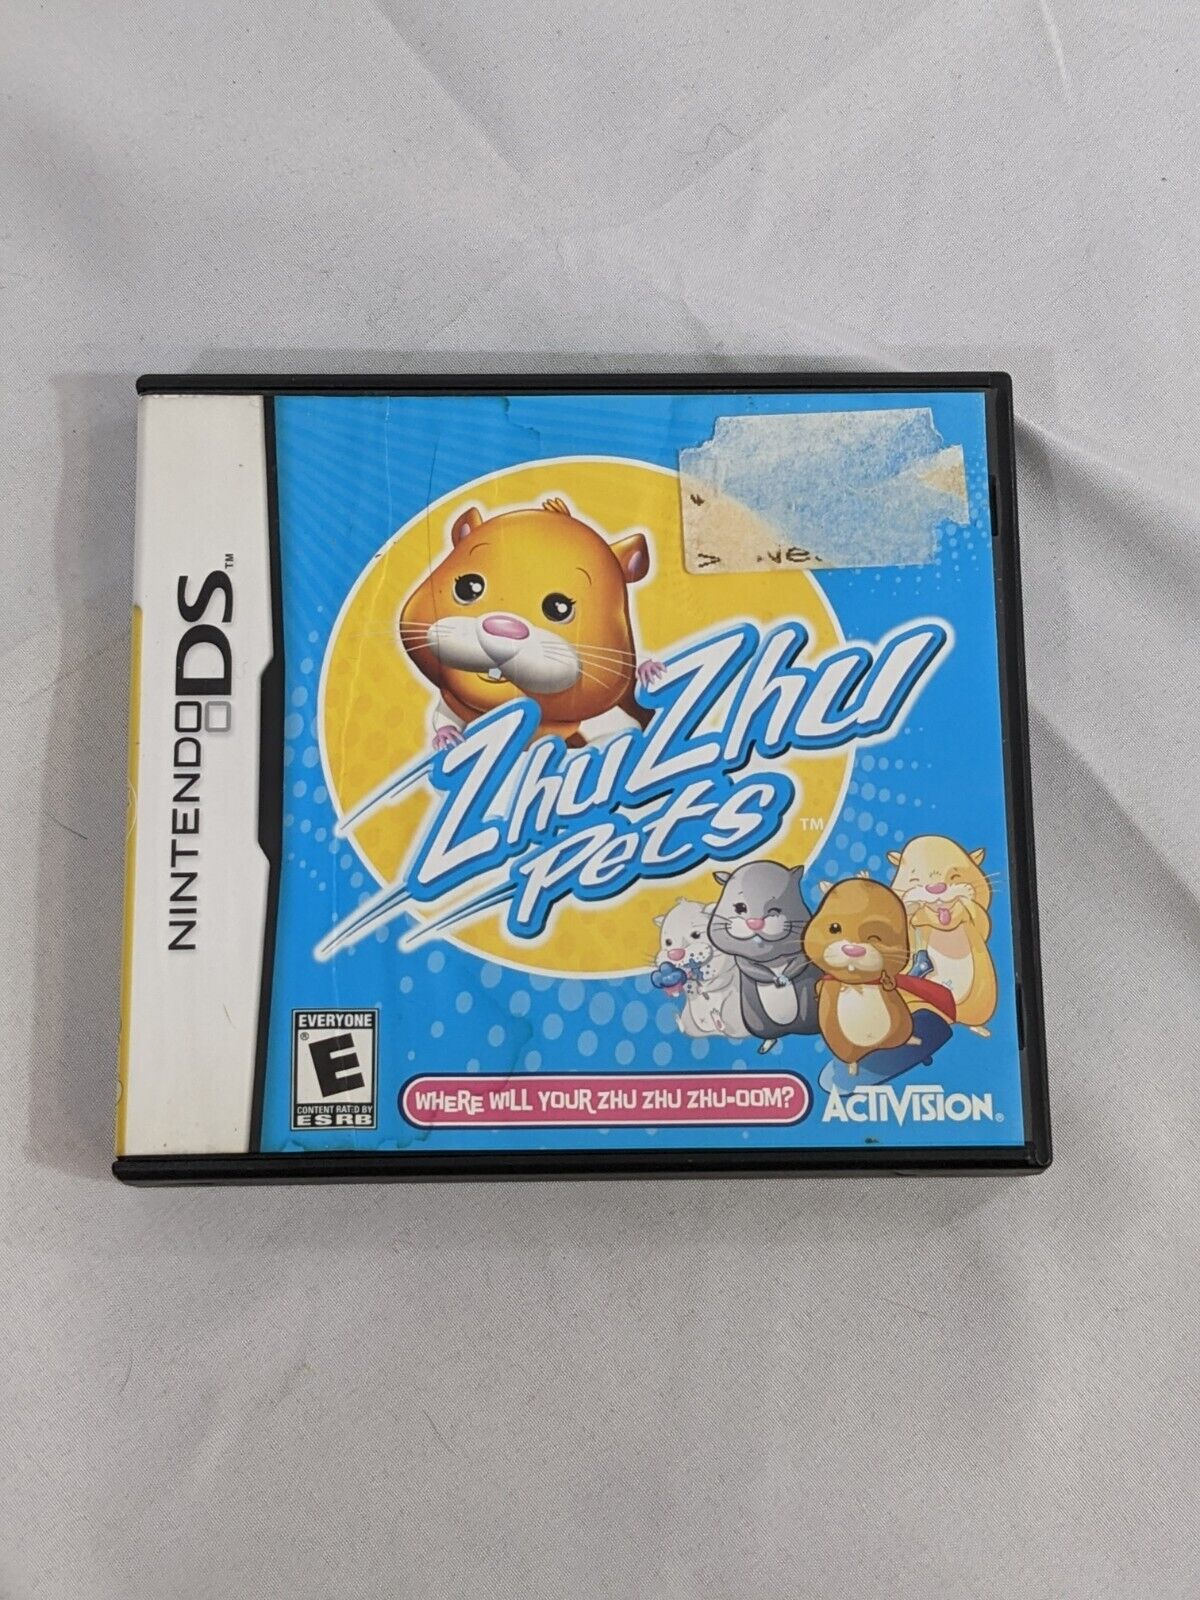 Nintendo DS Zhu Zhu Pets by Activision Cartridge Video Game CASE ONLY!